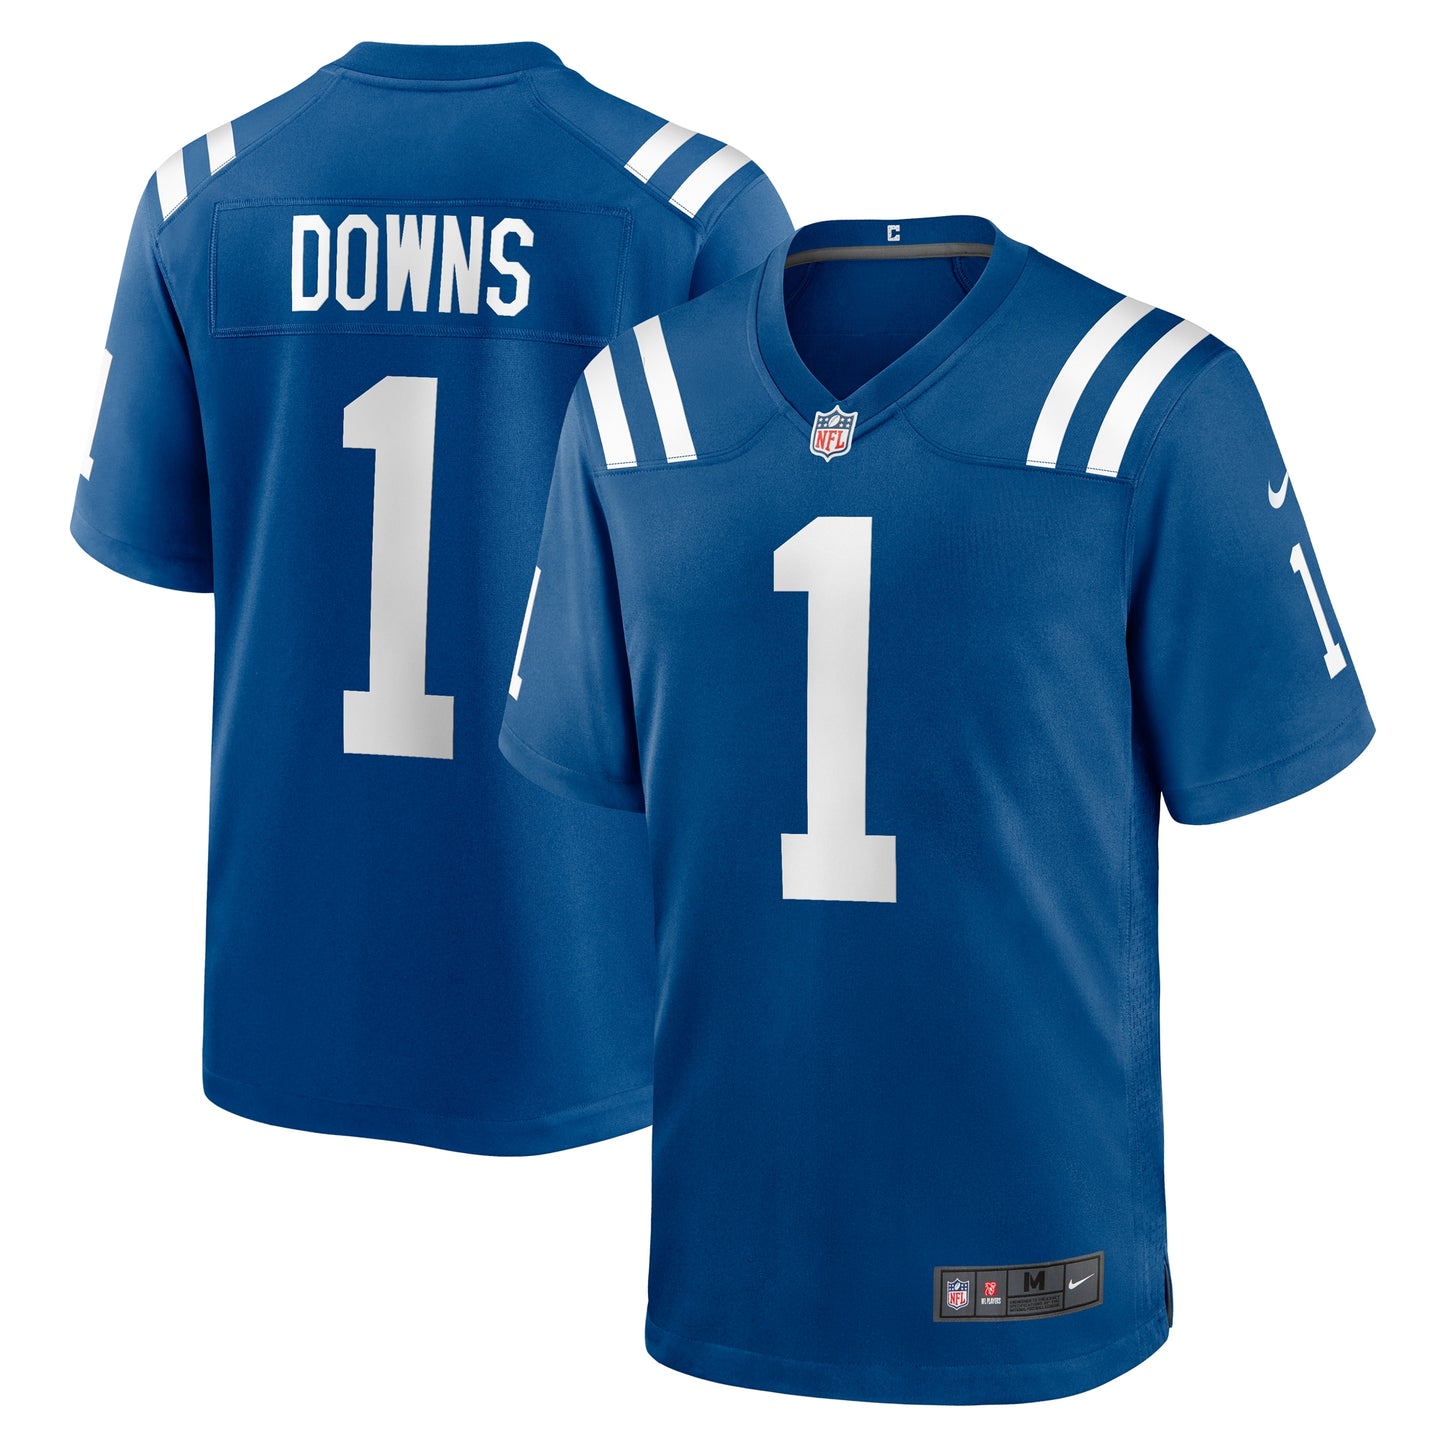 Josh Downs Indianapolis Colts Nike Team Game Jersey - Royal